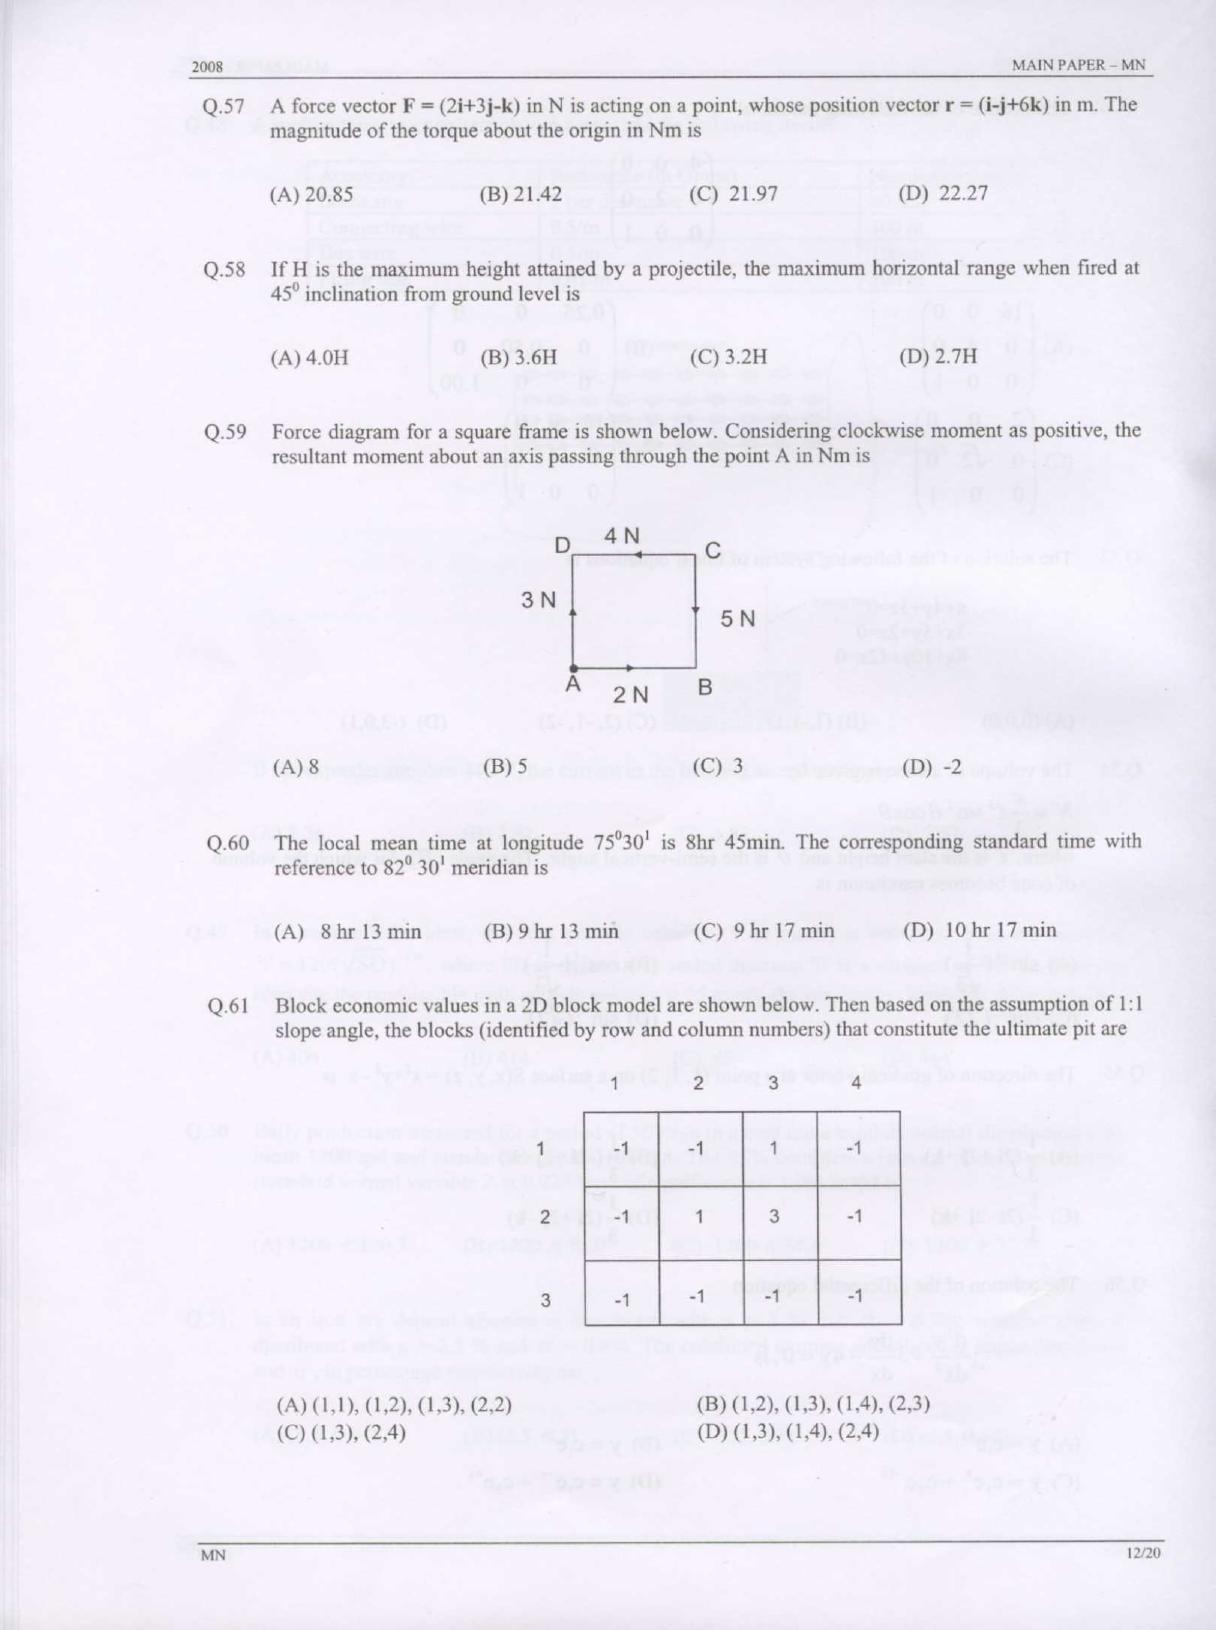 GATE 2008 Mining Engineering (MN) Question Paper with Answer Key - Page 12